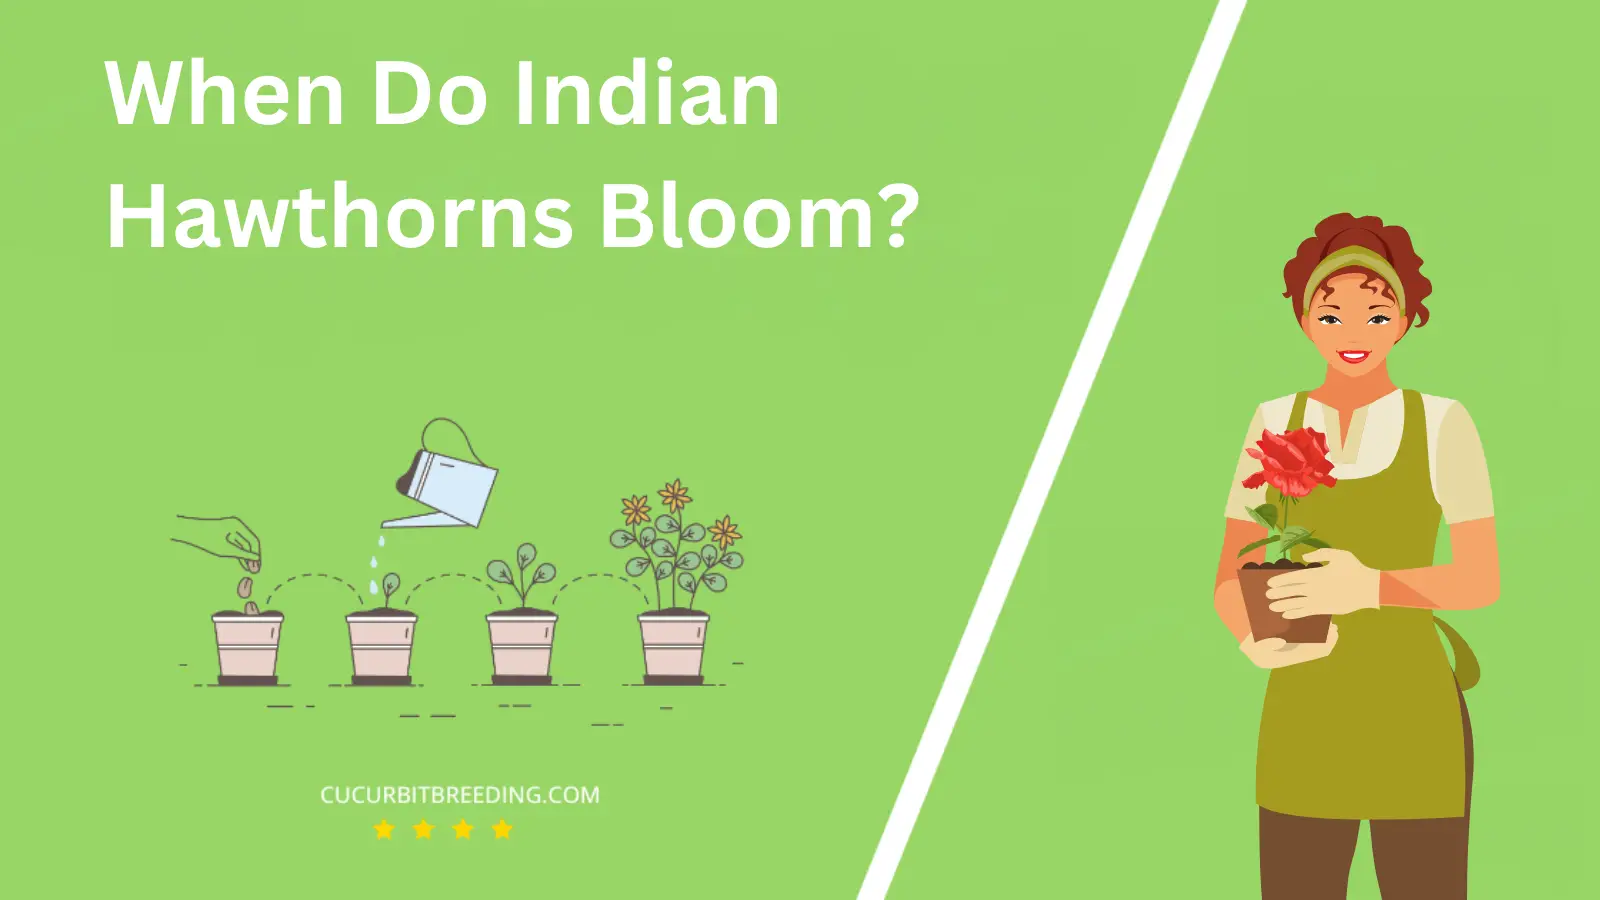 When Do Indian Hawthorns Bloom?